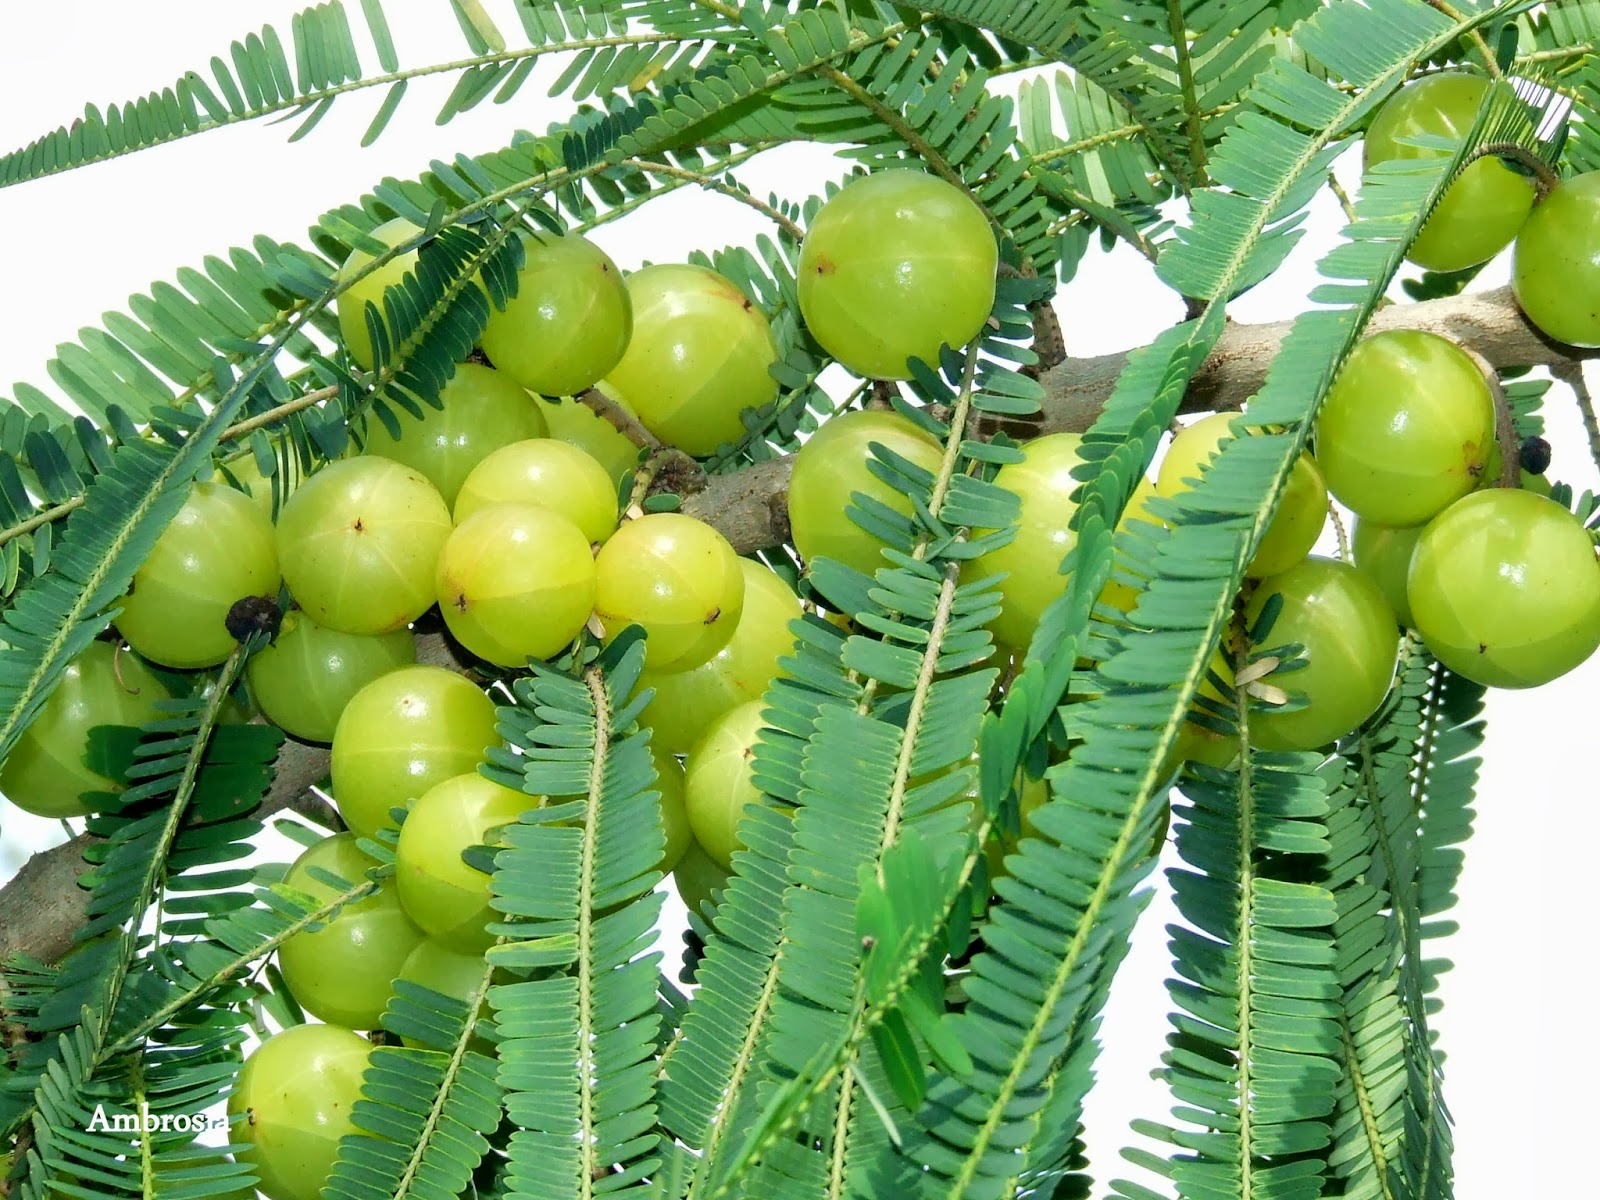 Indian Gooseberry Or Amla Fruit On Tree Background Wallpaper Image For Free  Download - Pngtree